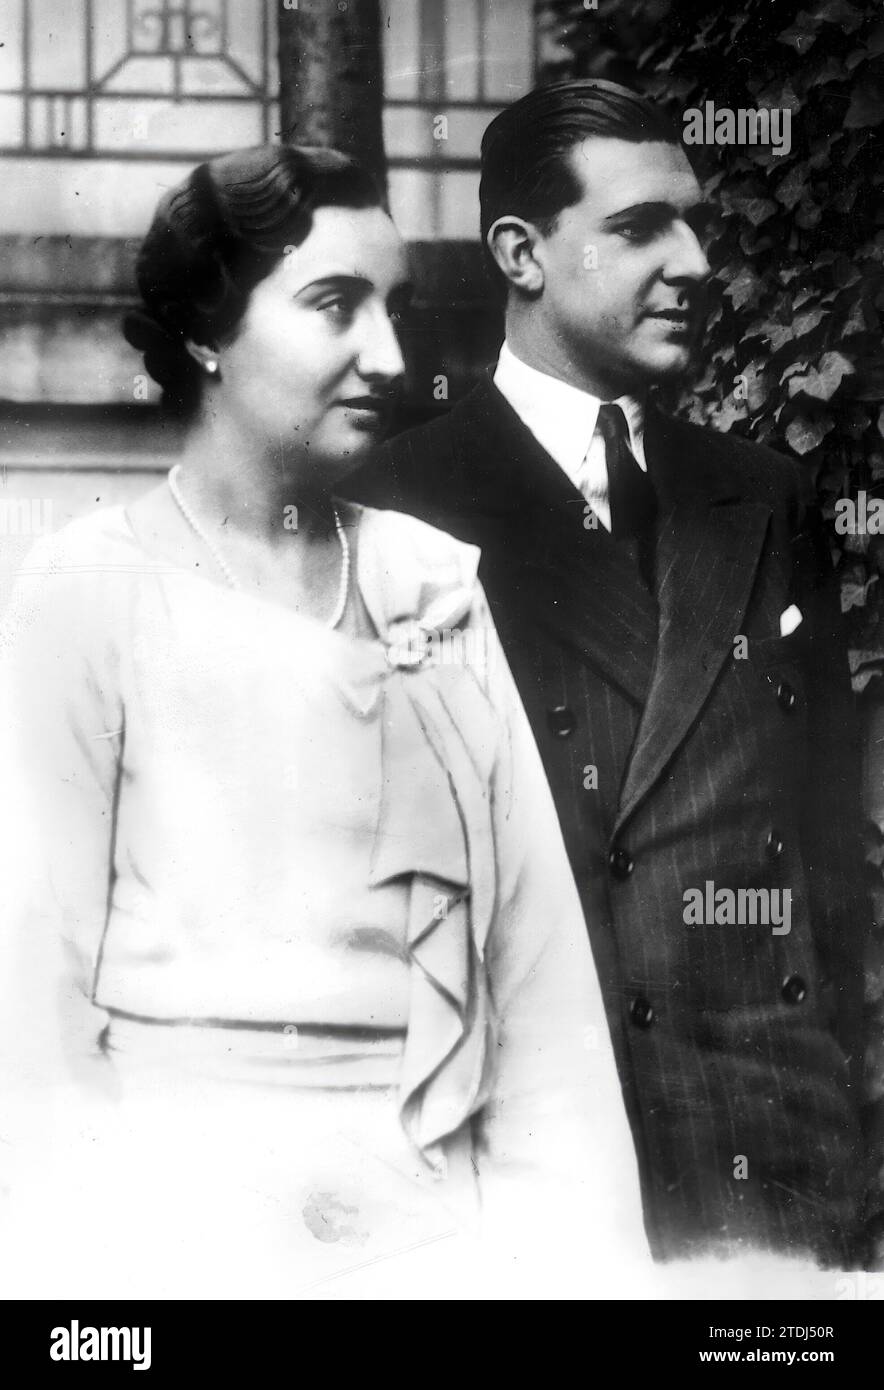 03/22/1935. Don Juan de Borbon and his future wife. In the photo we see the infant Don Juan de Borbón with the Princess Doña María de las Mercedes, with whom he would marry. Credit: Album / Archivo ABC / Fotofiel Stock Photo